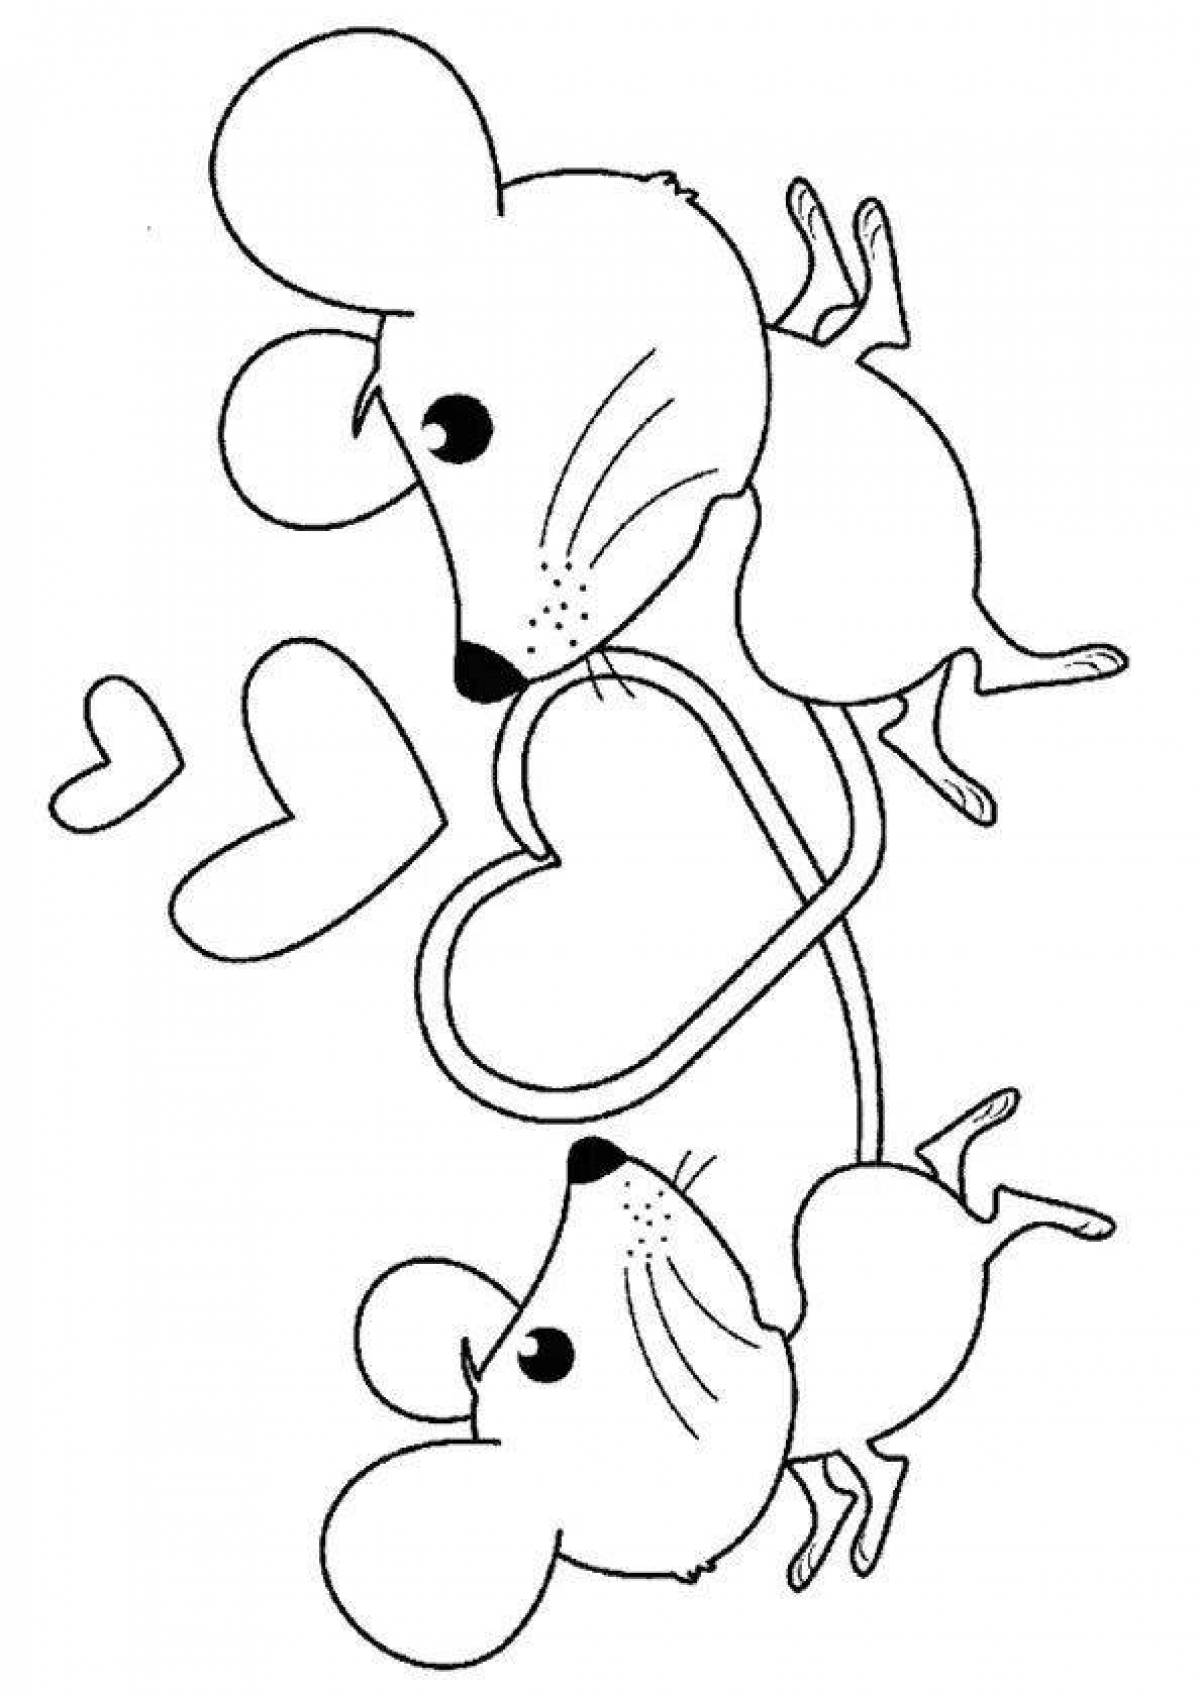 Coloring book great mouse tim